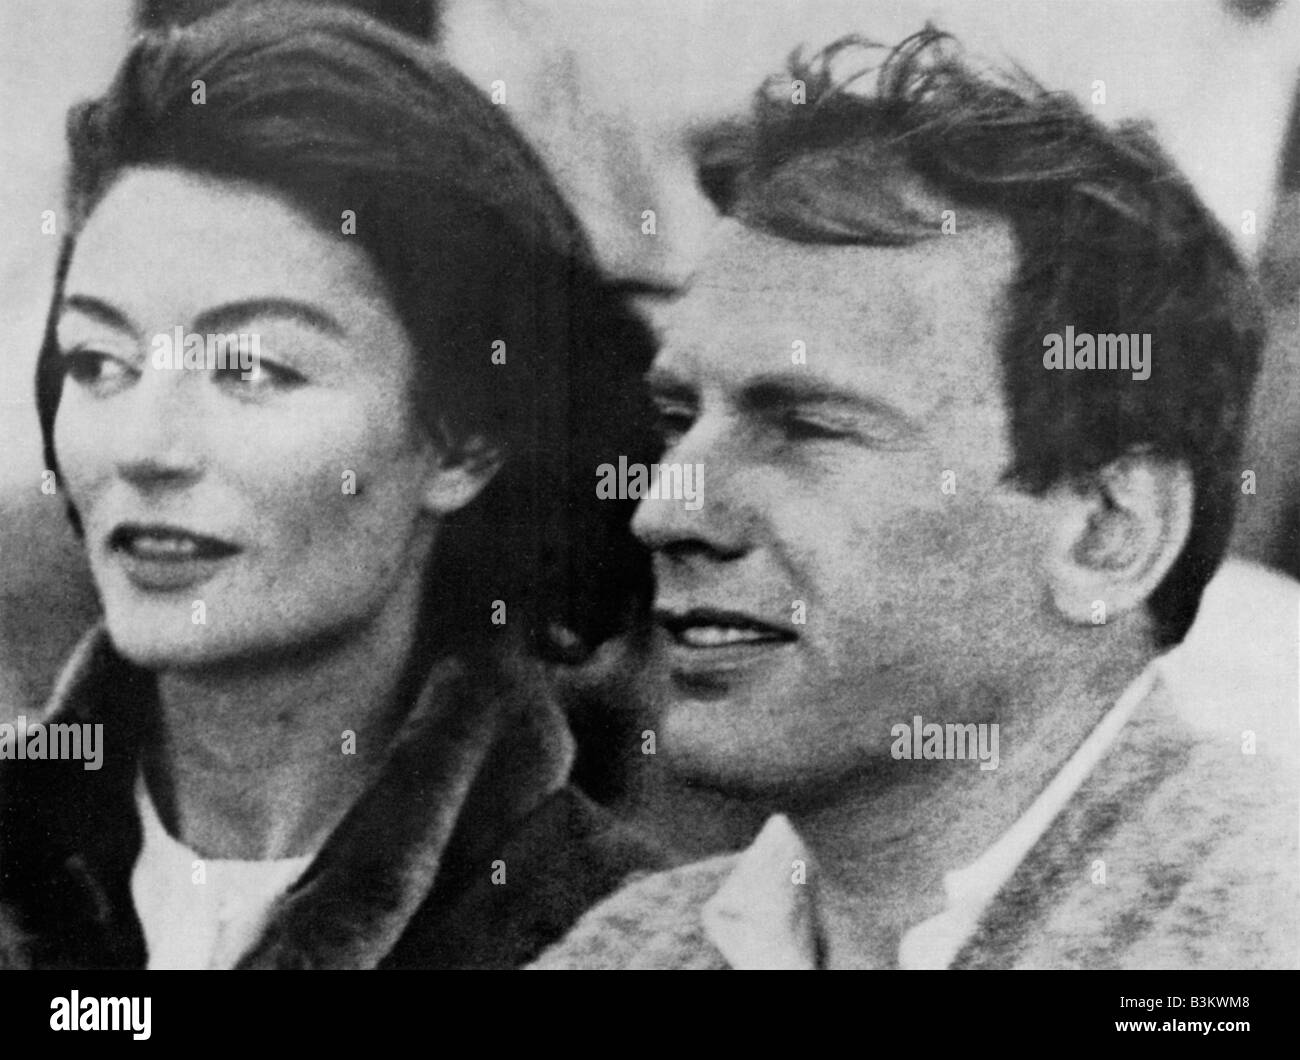 UN HOMME ET UNE FEMME aka A Man and a Woman 1966 Les Films 13 film with Anouk Aimee and Jean-Louis Trintignant Stock Photo